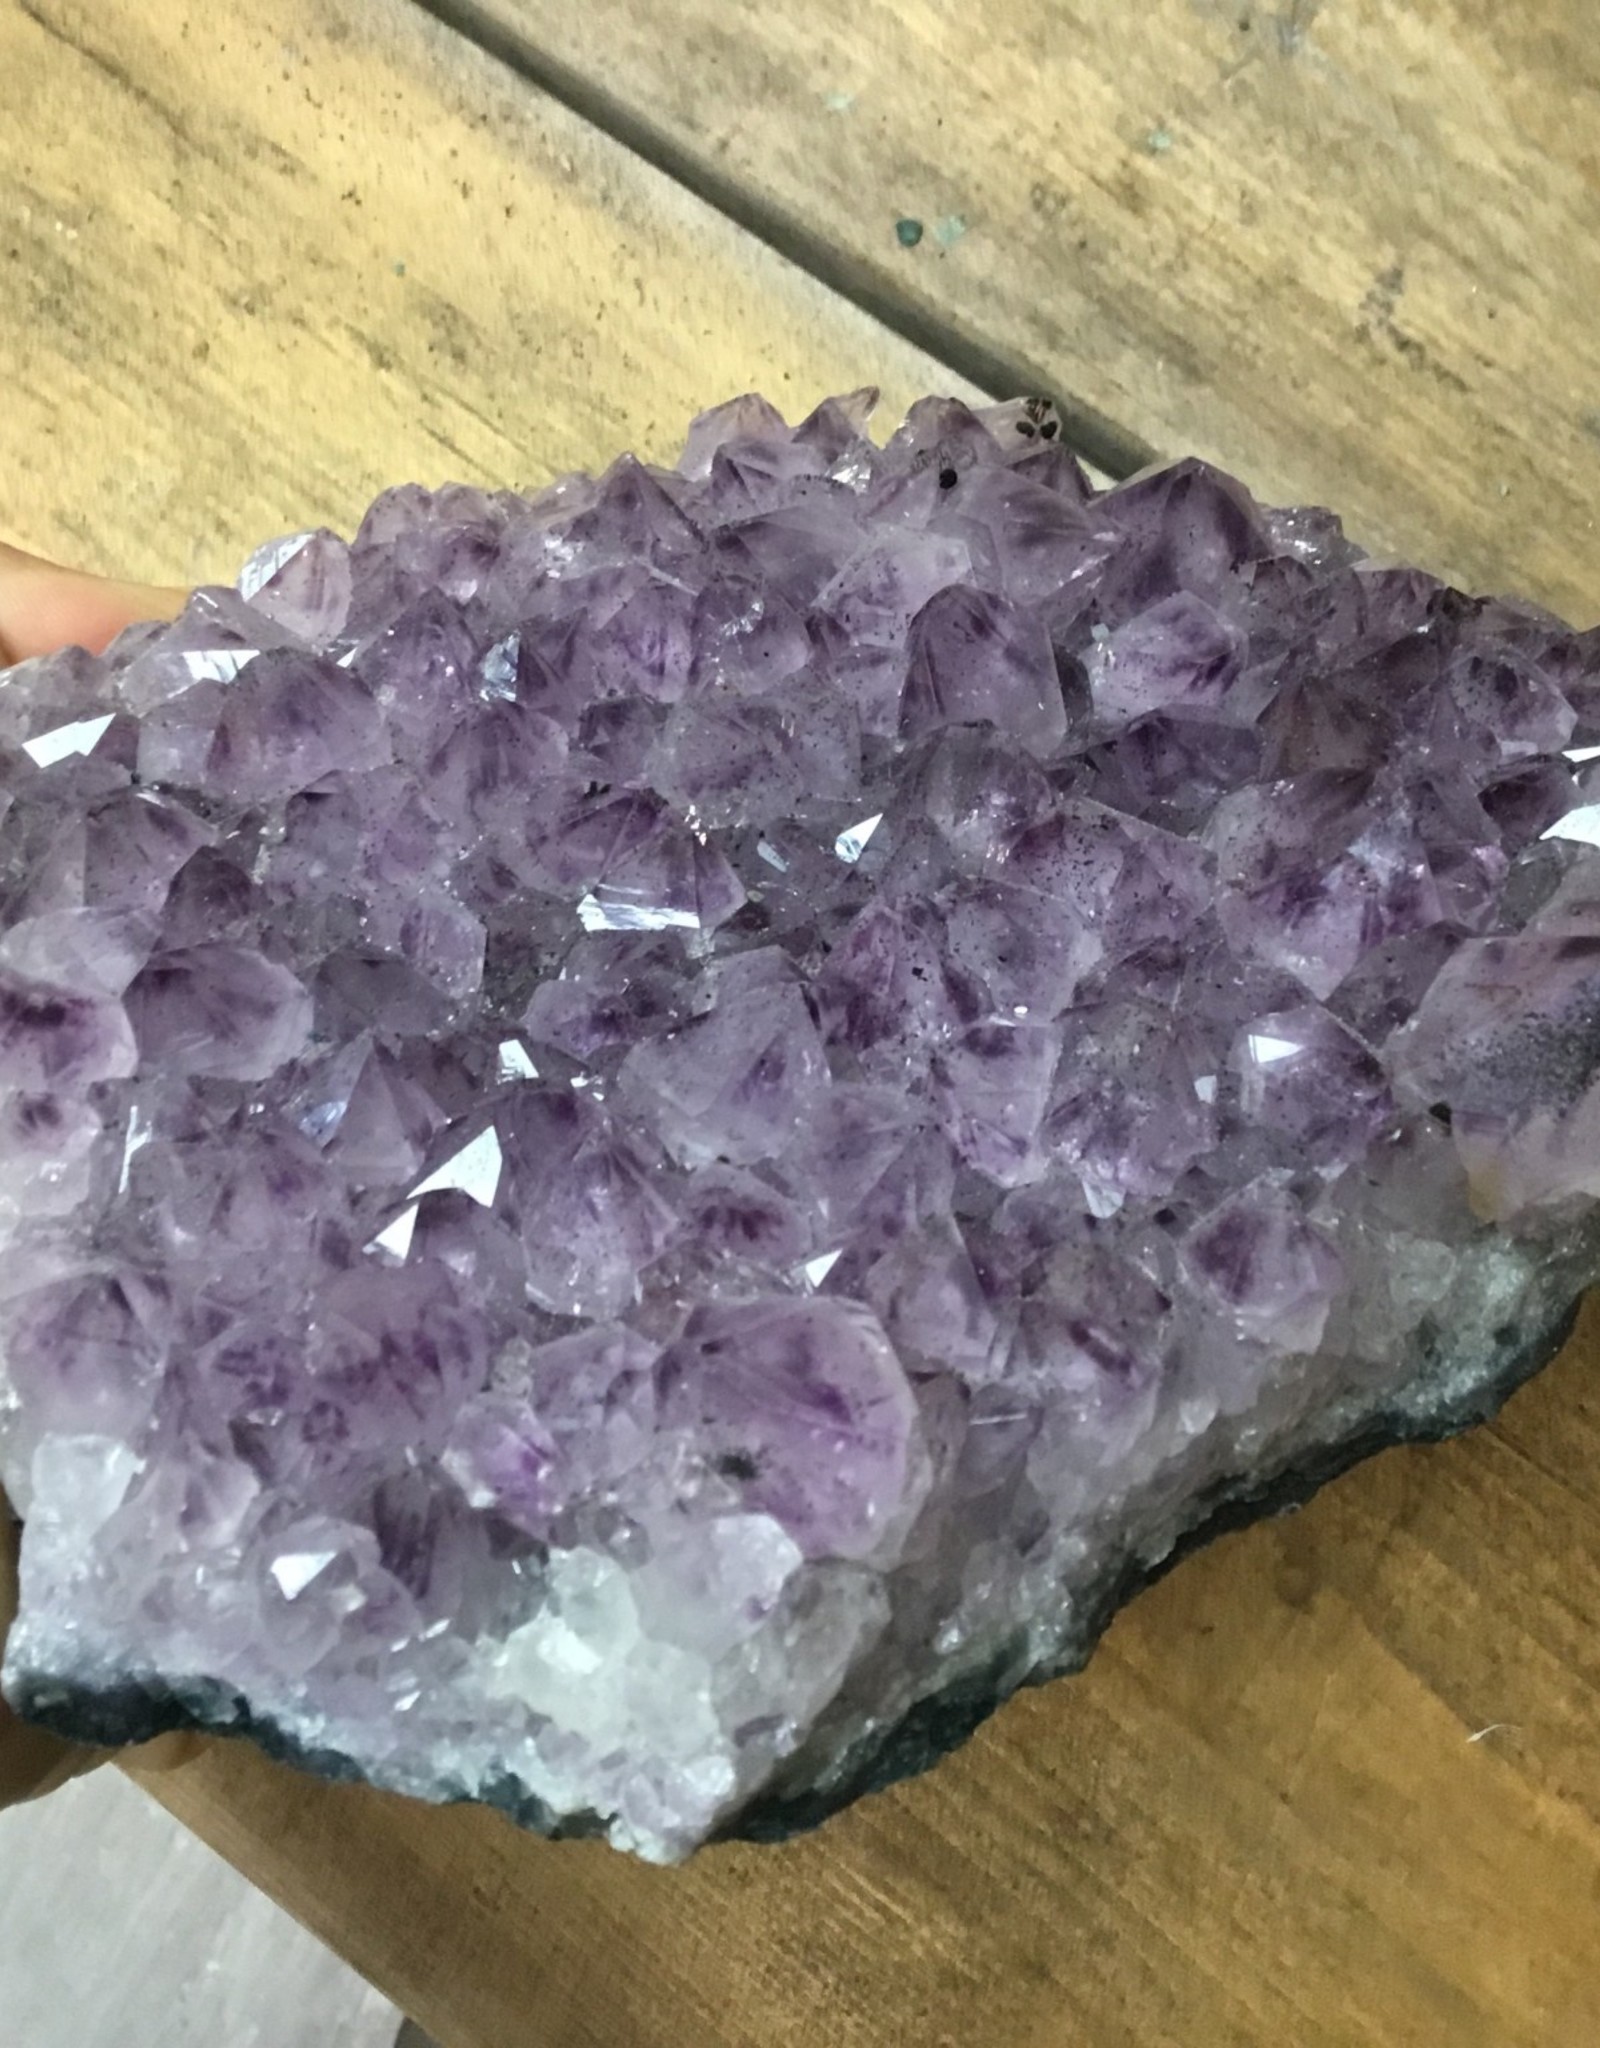 Large Specialty Amethyst Cluster